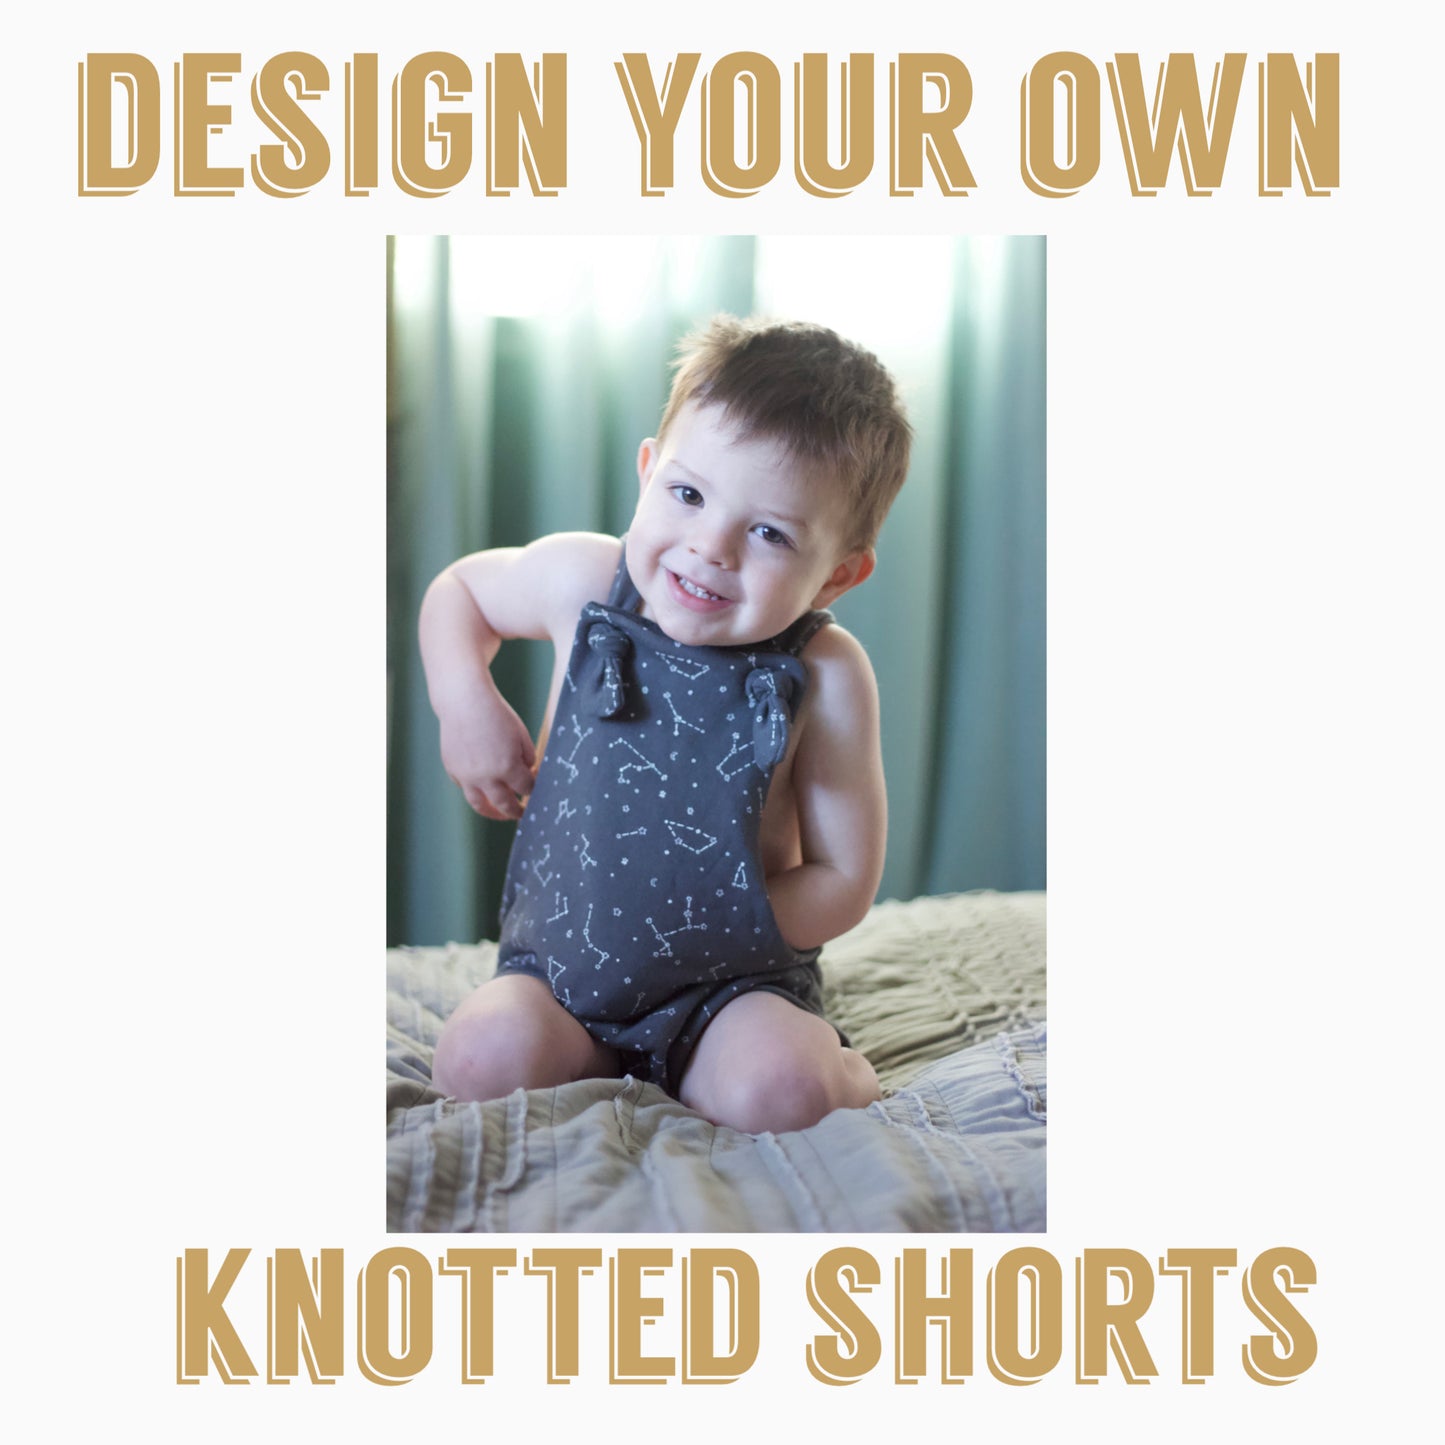 Design your own| knotted overall shorts